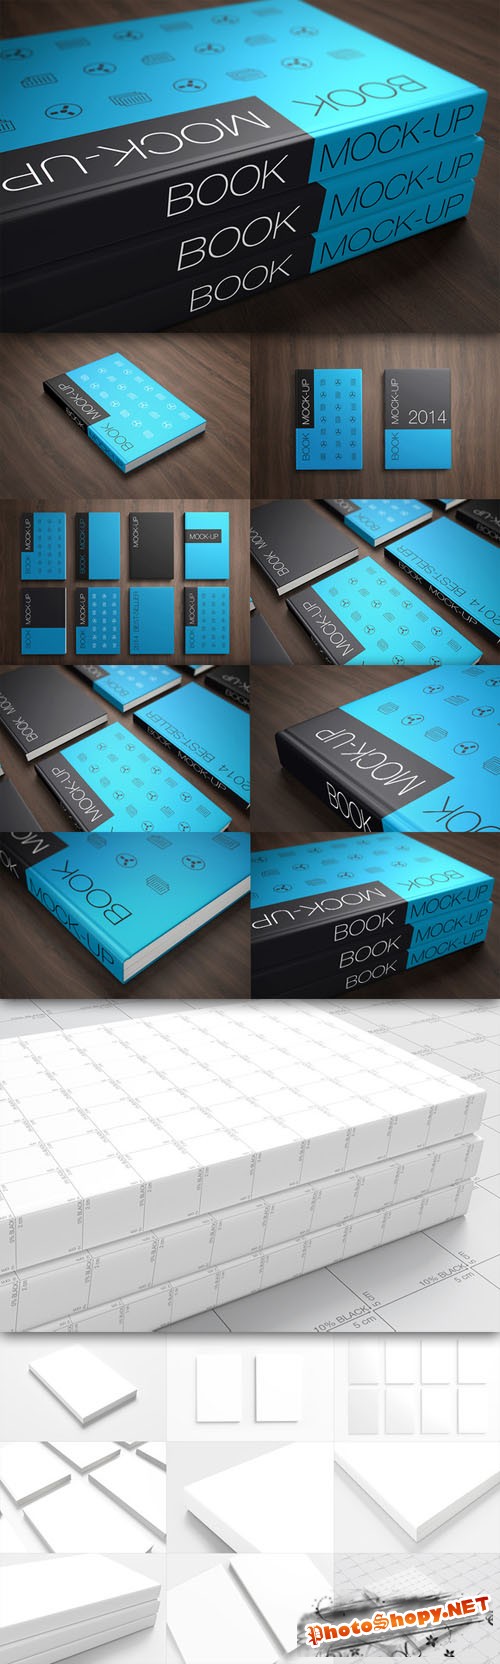 CreativeMarket - Book Cover Mock-up's